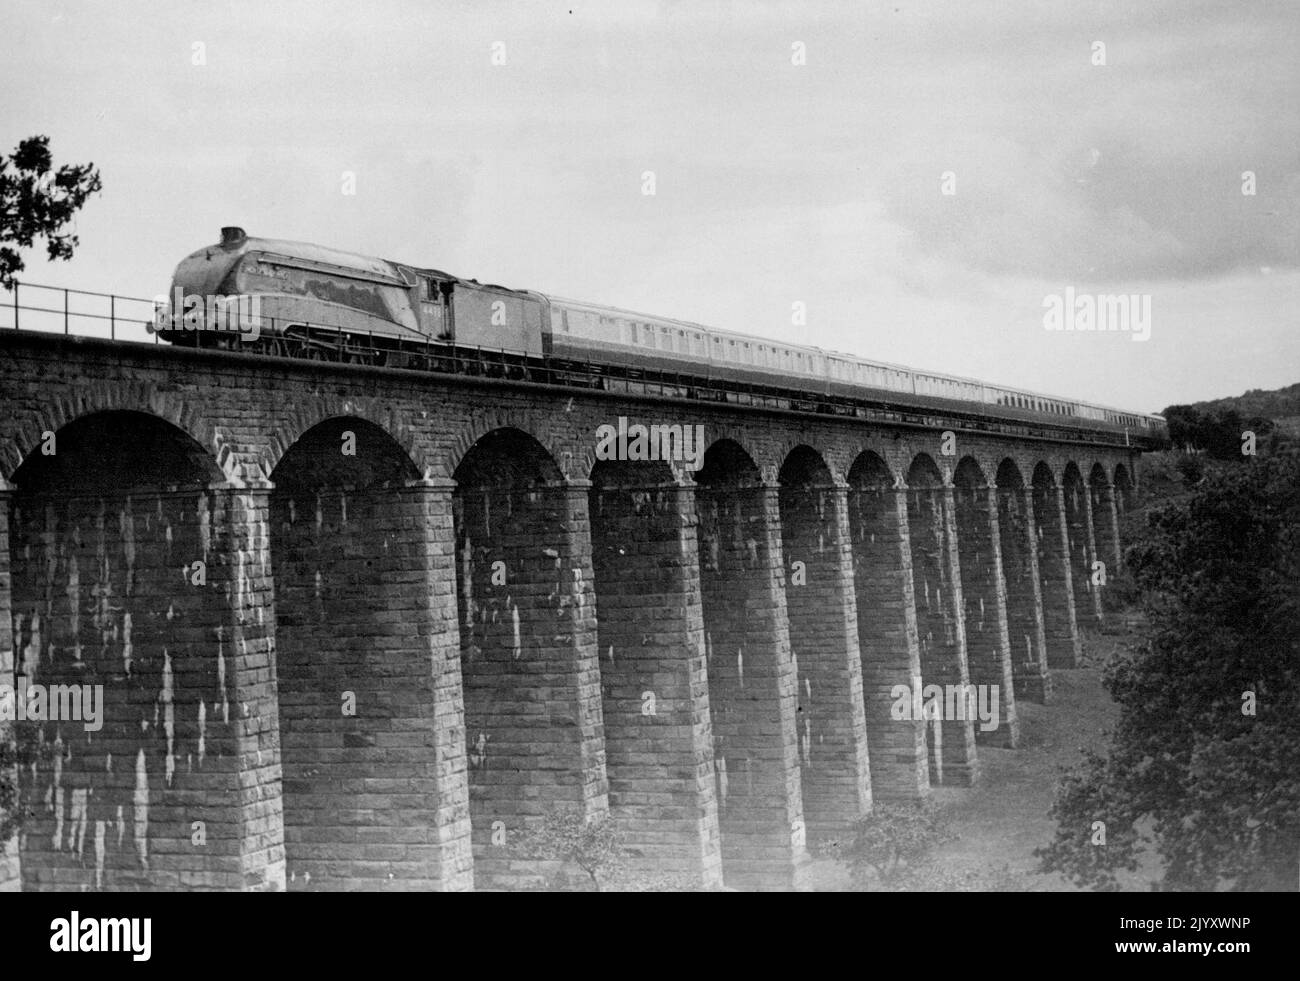 L. N. E. R. Coronation Train's Trial Run - The London & North Eastern Railways a new blue and white, streamlined "Coronation" express roaring over the Eighteen Arches Viaduct across the River Aln, Northumberland, yesterday on her first trial run from London to Edinburgh, These new "Coronation" expresses commence service on Monday and will make the Journey between London and Edinburgh in six hours. July 02, 1937. (Photo by Topical Press). Stock Photo